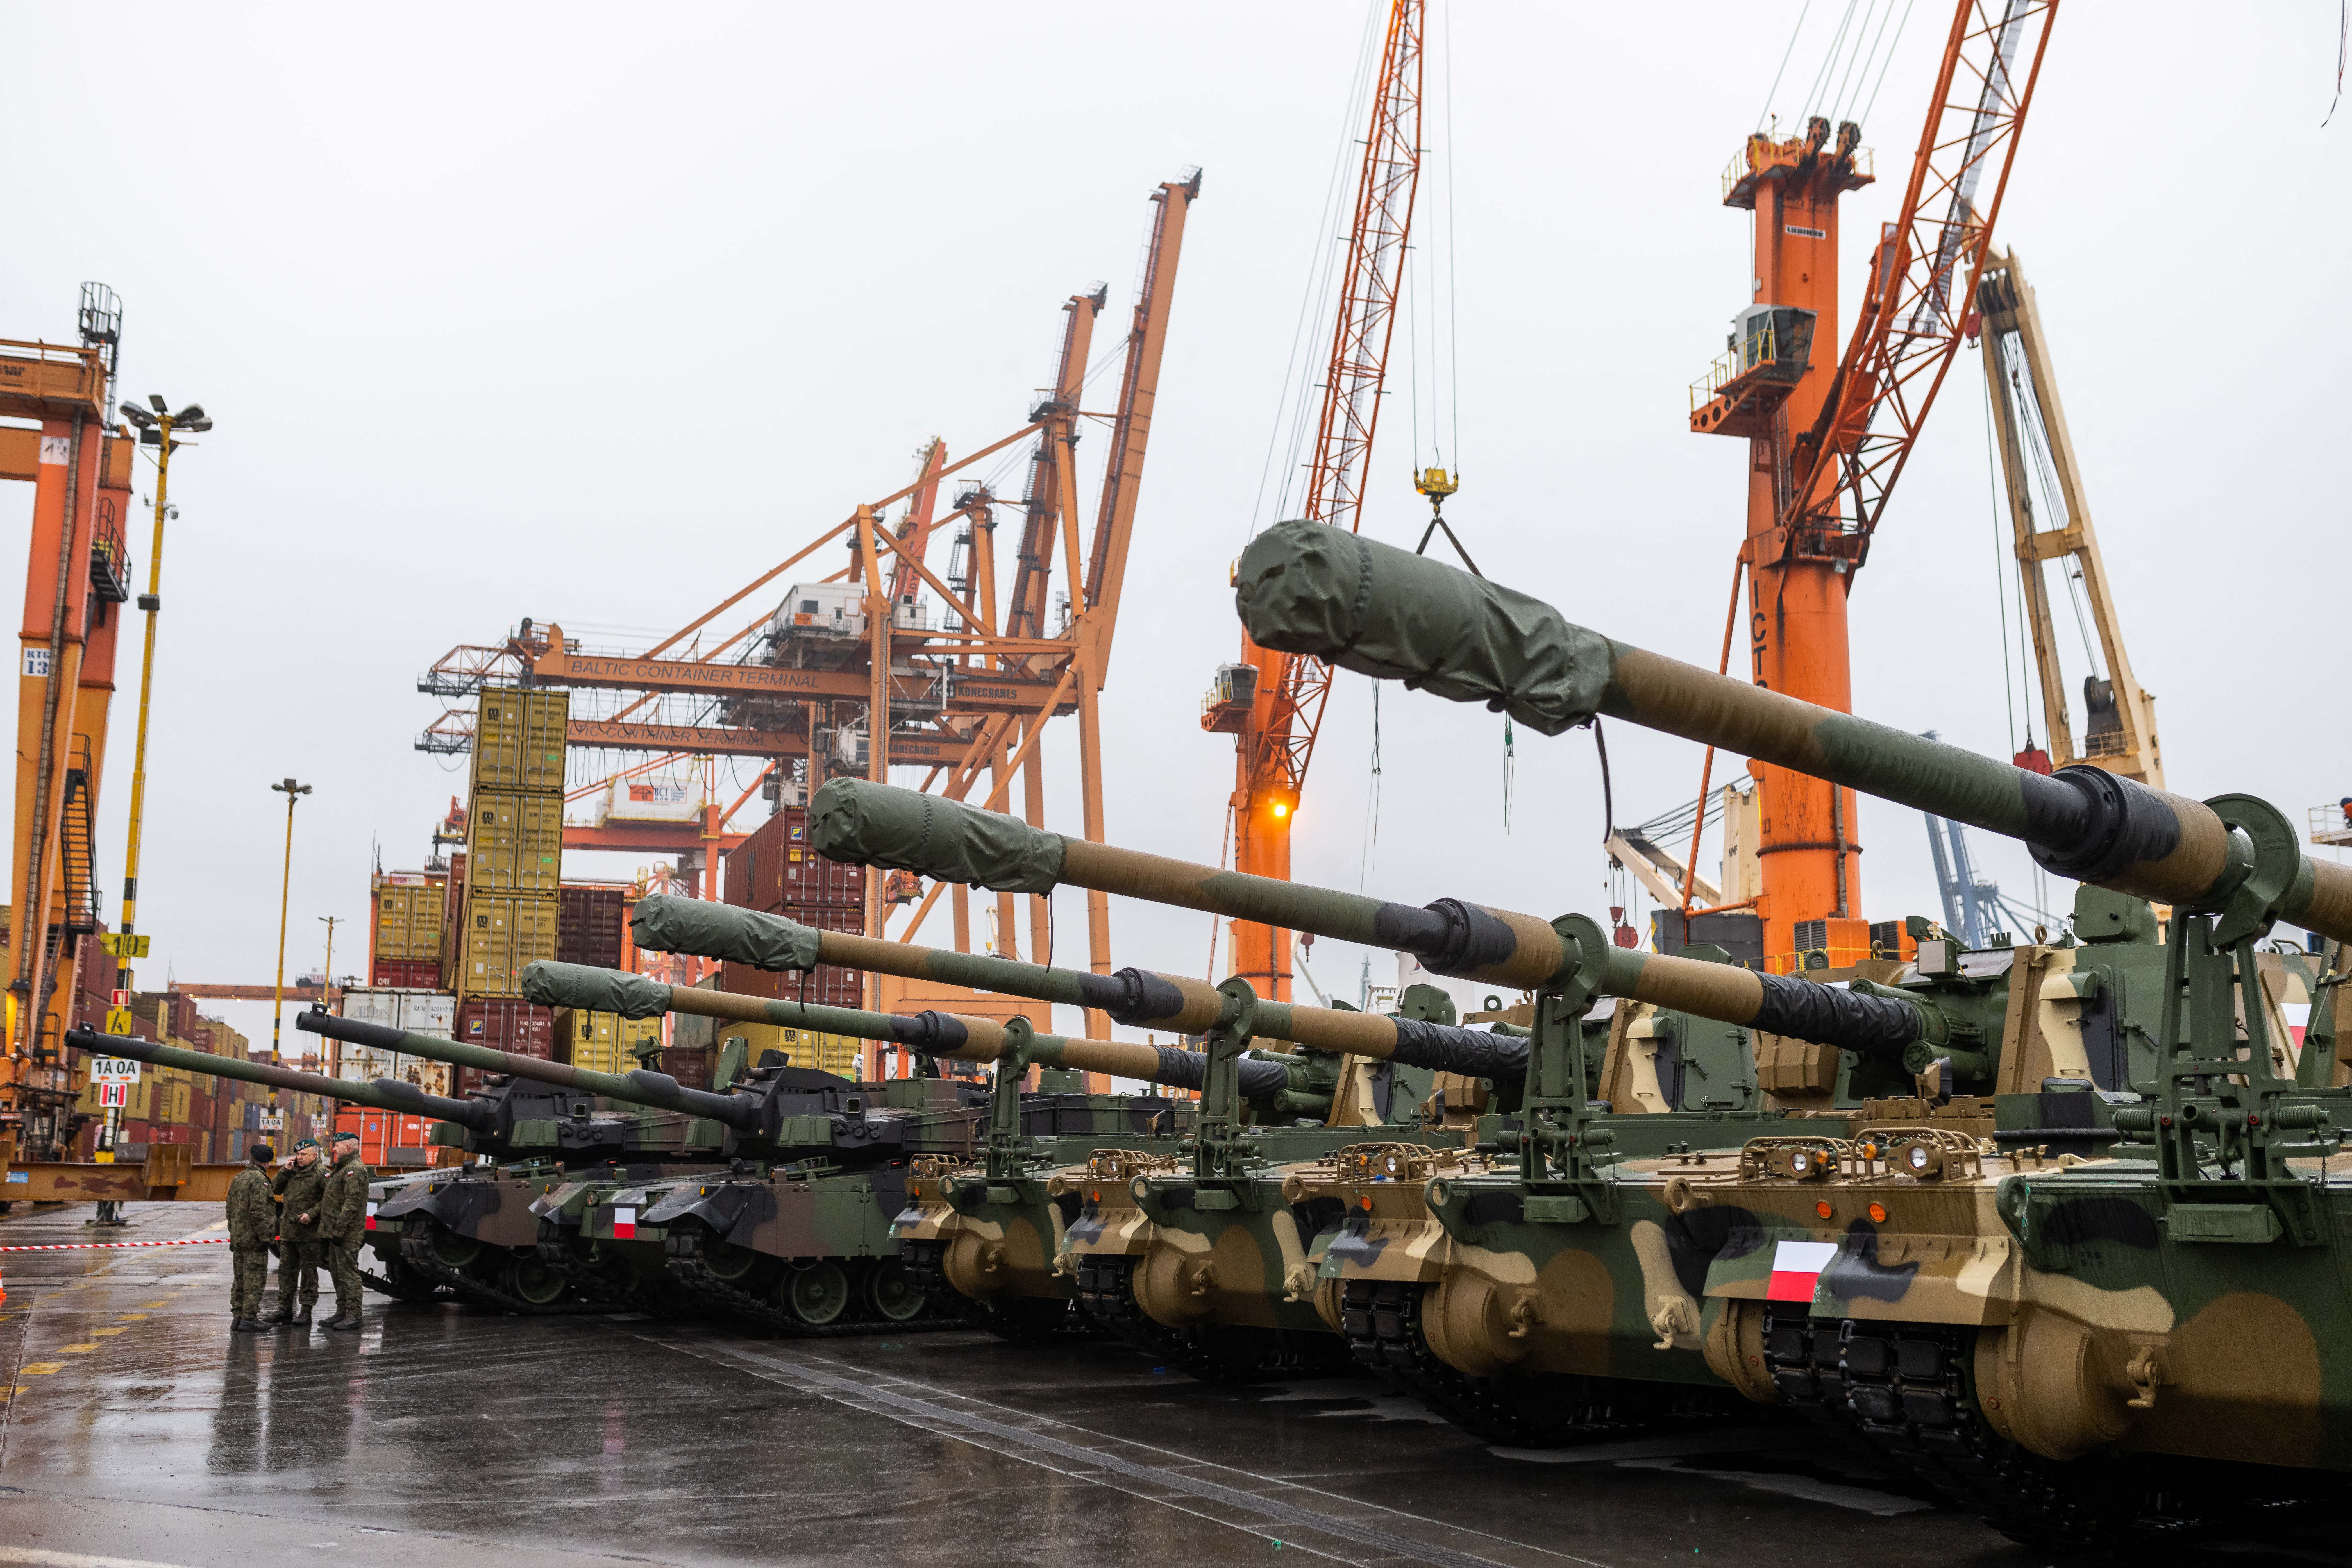 Polish Army soldiers stand in front of army equipment in the port after the arrival of the first K2 tanks and K9 howitzers for Poland on December 6, 2022 at the Baltic Container Terminal in Gdynia. - The Polish Army is strengthening its potential with the use of South Korean defense technologies. In July 2022 an agreement was concluded with Hyundai Rotem for the acquisition of a total of 1,000 K2 tanks with accompanying vehicles. Poland has massively stepped up weapons purchases since Russia invaded Ukraine, as well as sending military aid to Kyiv and taking in millions of Ukrainian refugees. (Photo by MATEUSZ SLODKOWSKI / AFP) (Photo by MATEUSZ SLODKOWSKI/AFP via Getty Images)